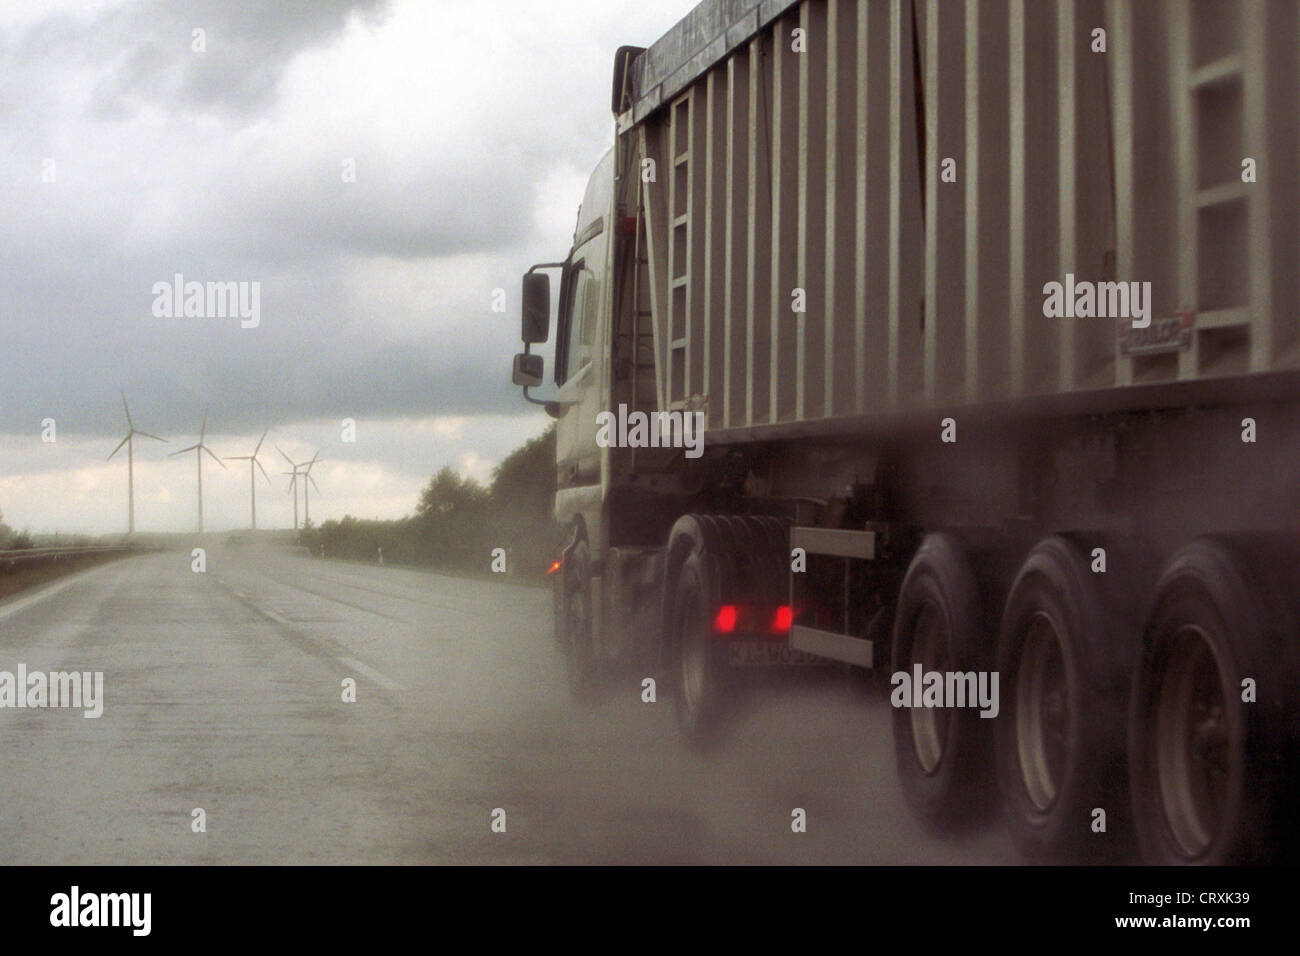 A truck on a rain-slicked highway Stock Photo